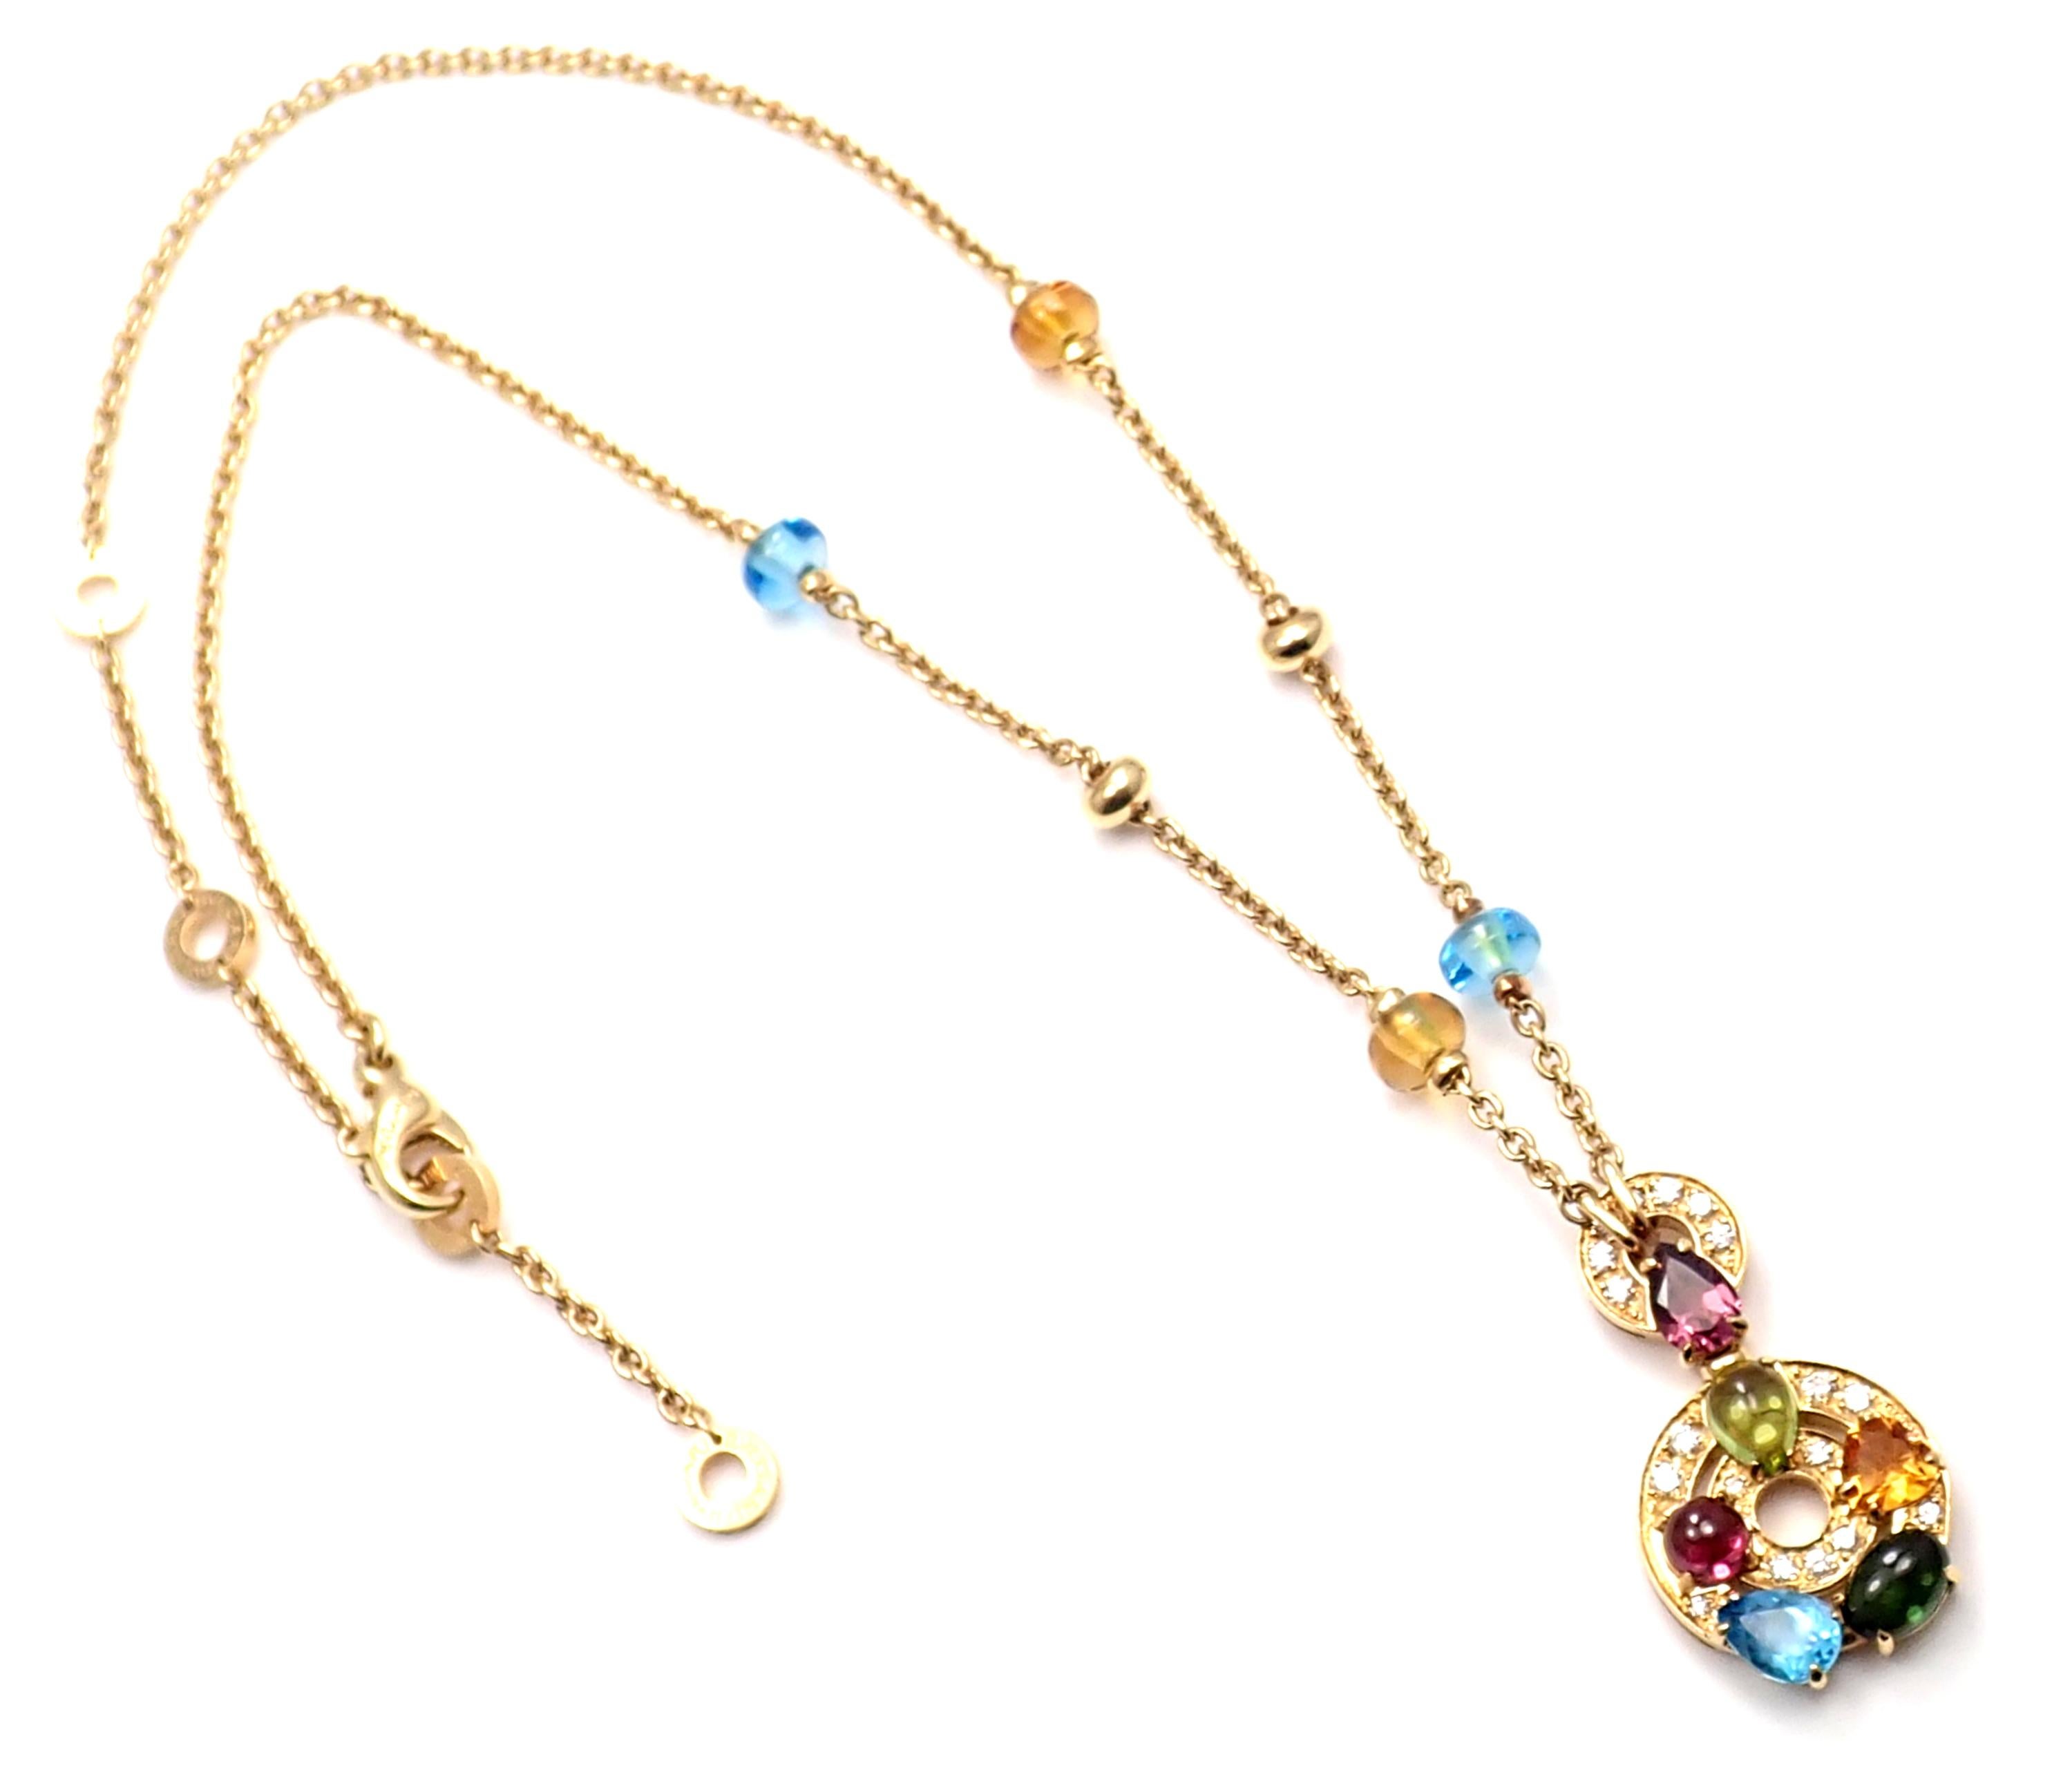 18k Yellow Gold Diamond Blue Topaz, Peridot, Citrine, Tourmaline Astrale Pendant Necklace by Bulgari.  
With 18 round brilliant cut VS1 clarity, G color diamonds total weight approx. .50ct
Details:  
Weight: 20.2 grams
Length: 18